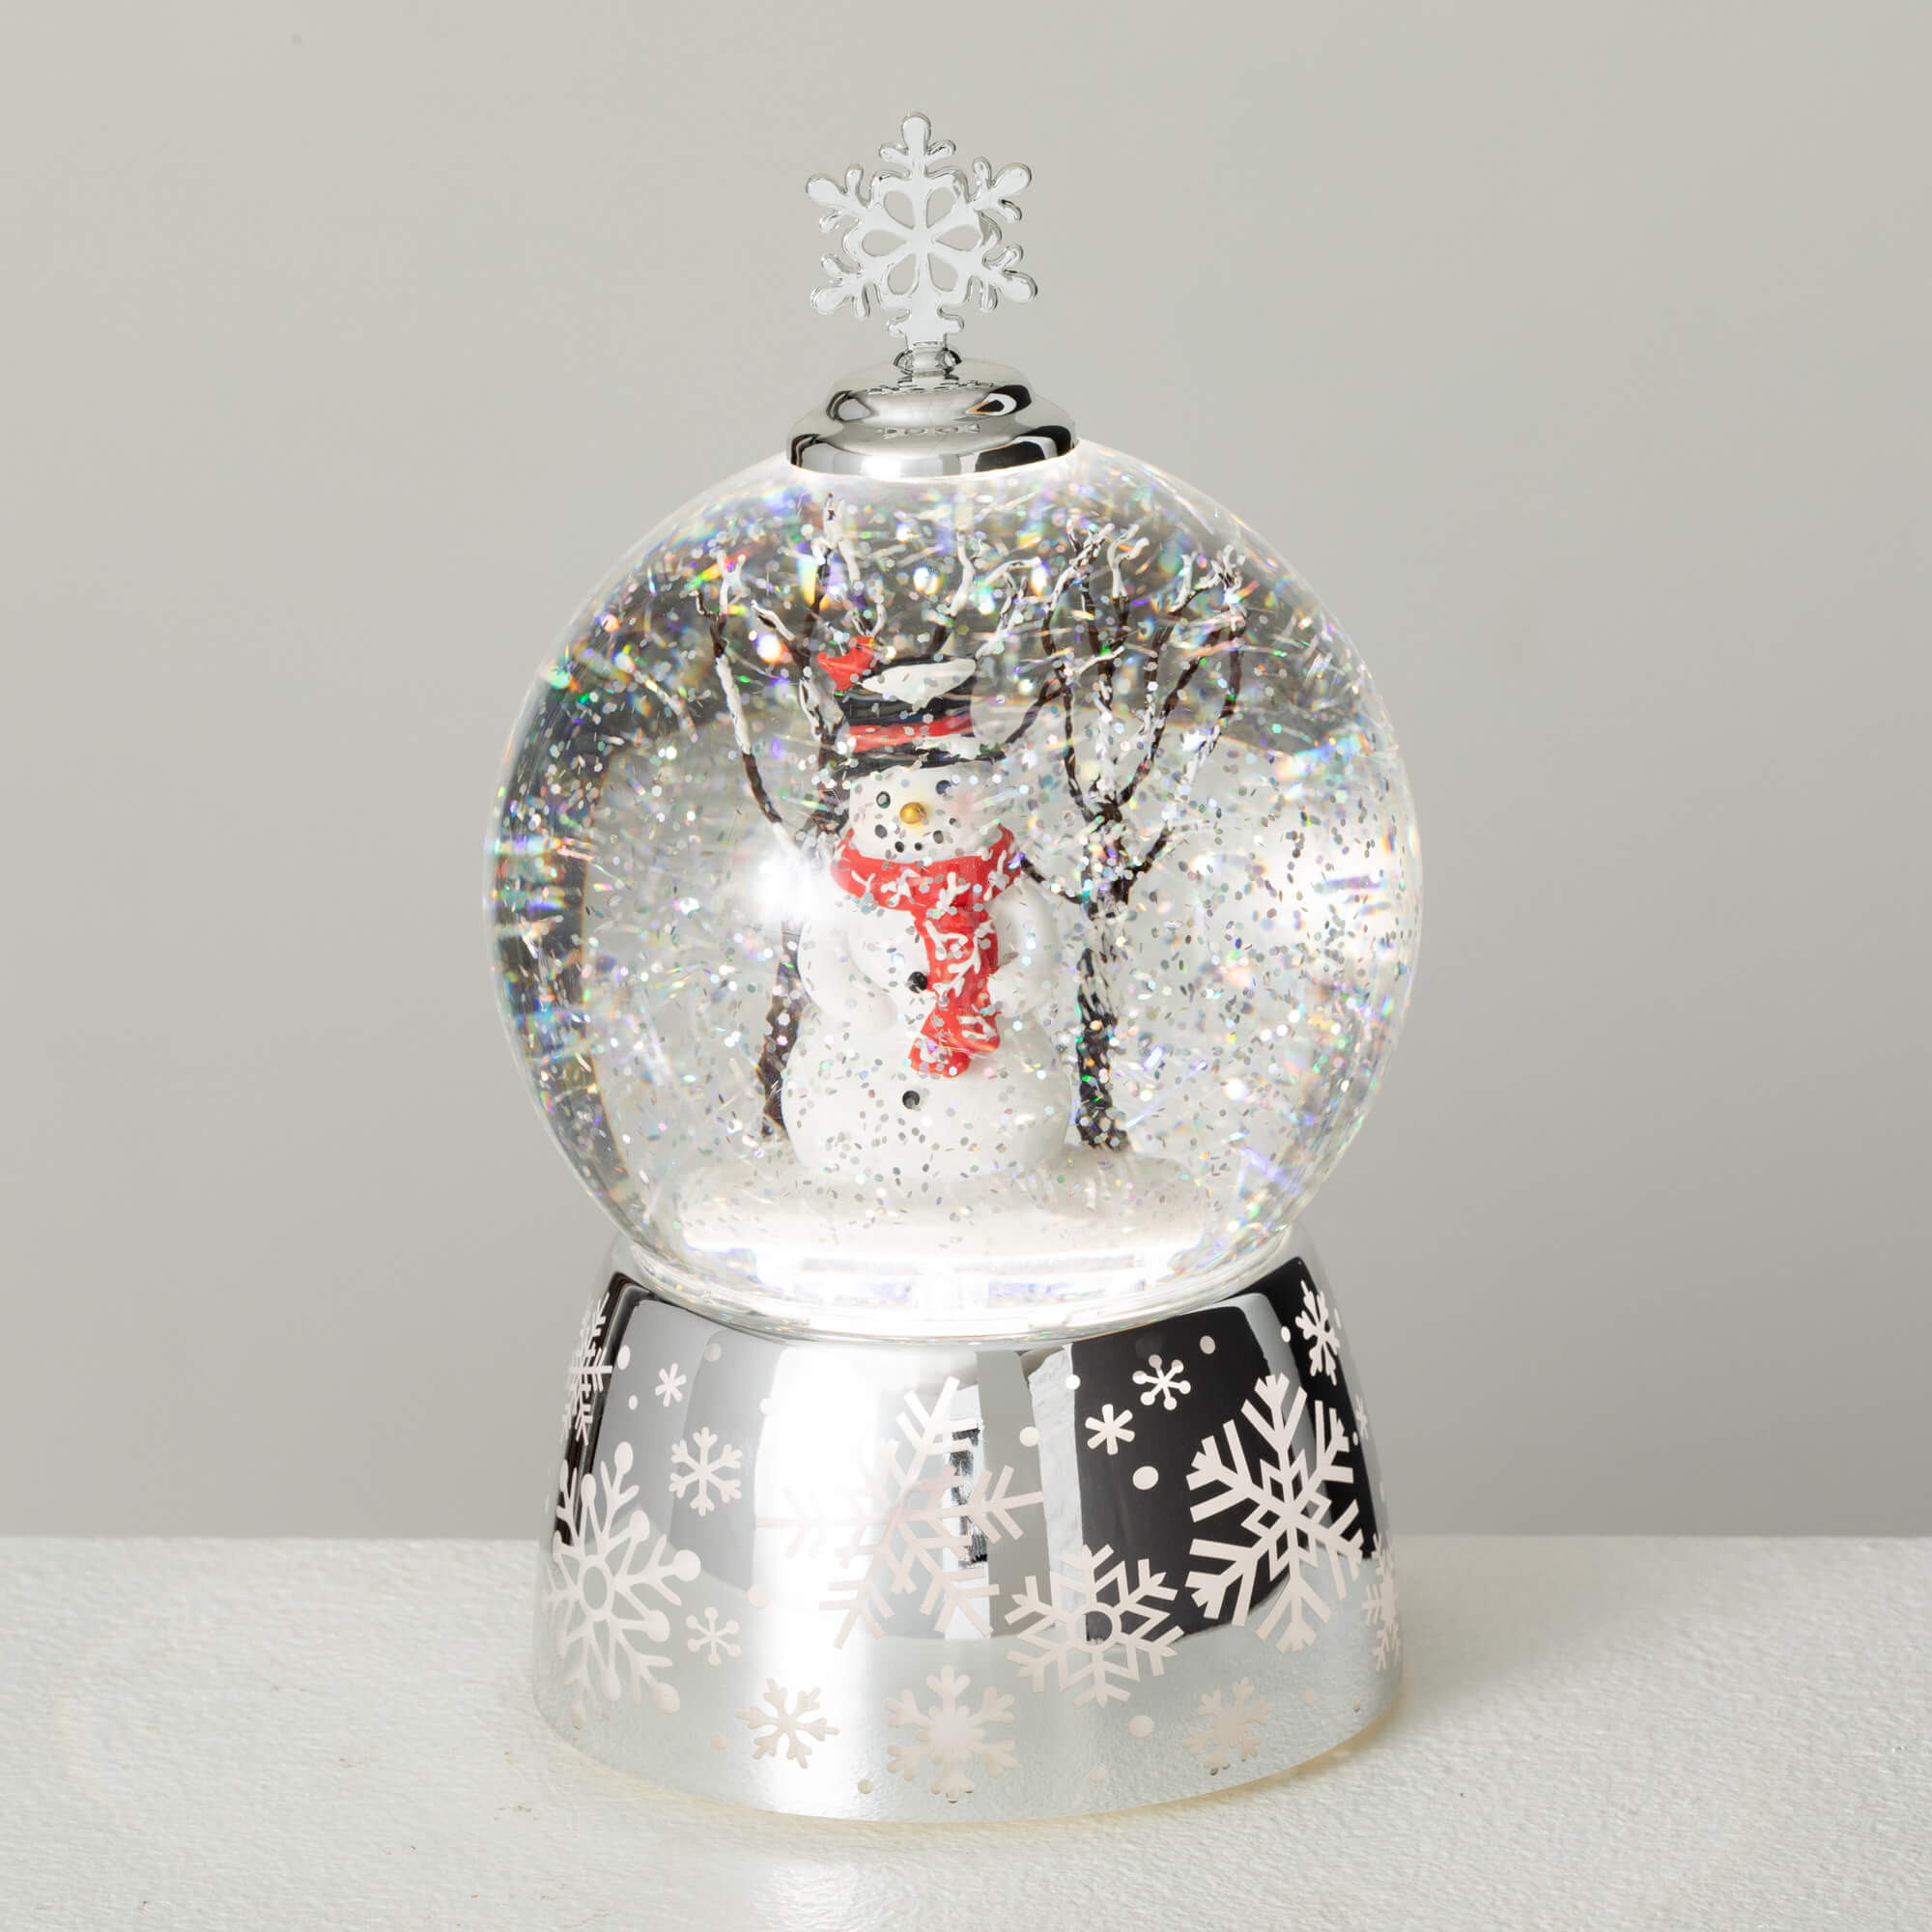 LIGHTED SNOWMAN SHIMMER DOME